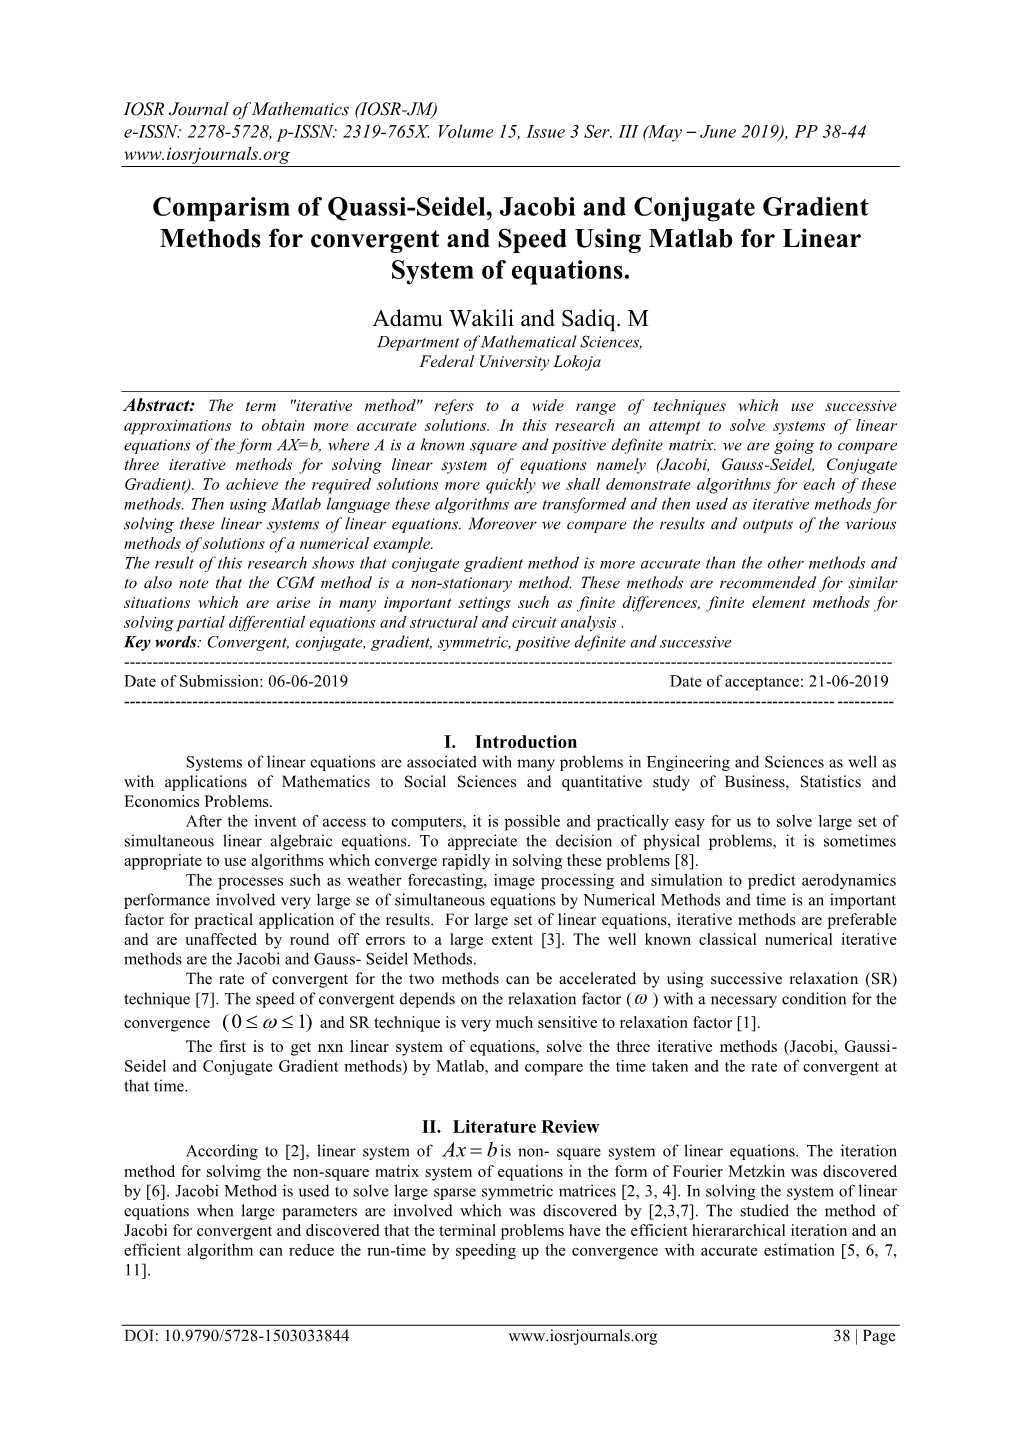 Comparism of Quassi-Seidel, Jacobi and Conjugate Gradient Methods for Convergent and Speed Using Matlab for Linear System of Equations